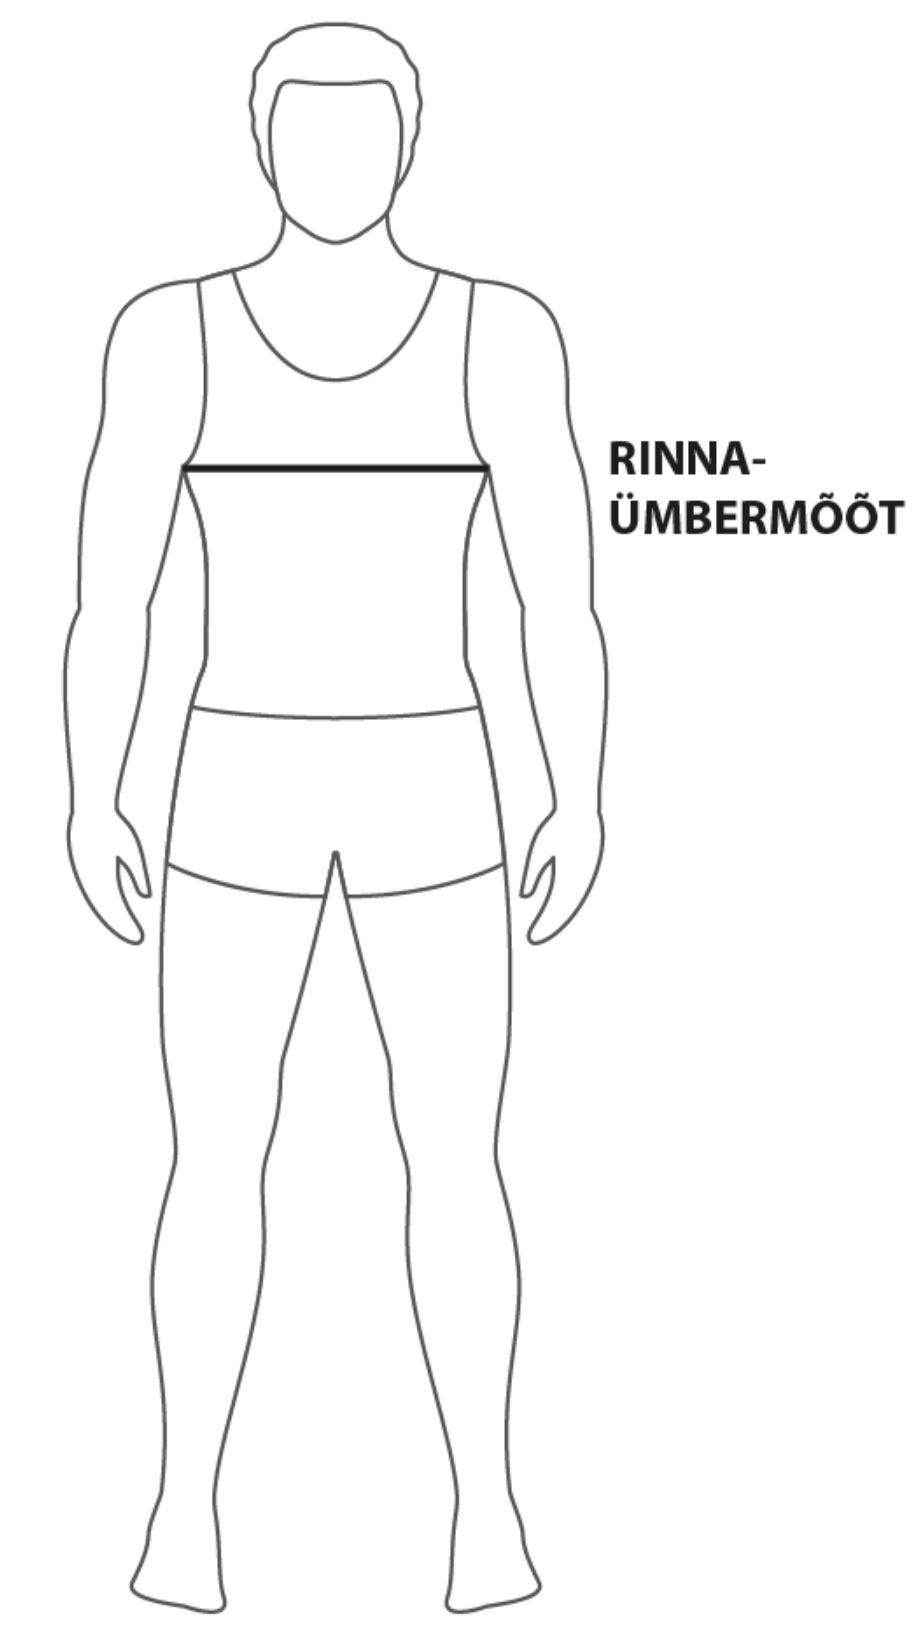 Picture of a person silhouette indicating placements of measurements with black lines.